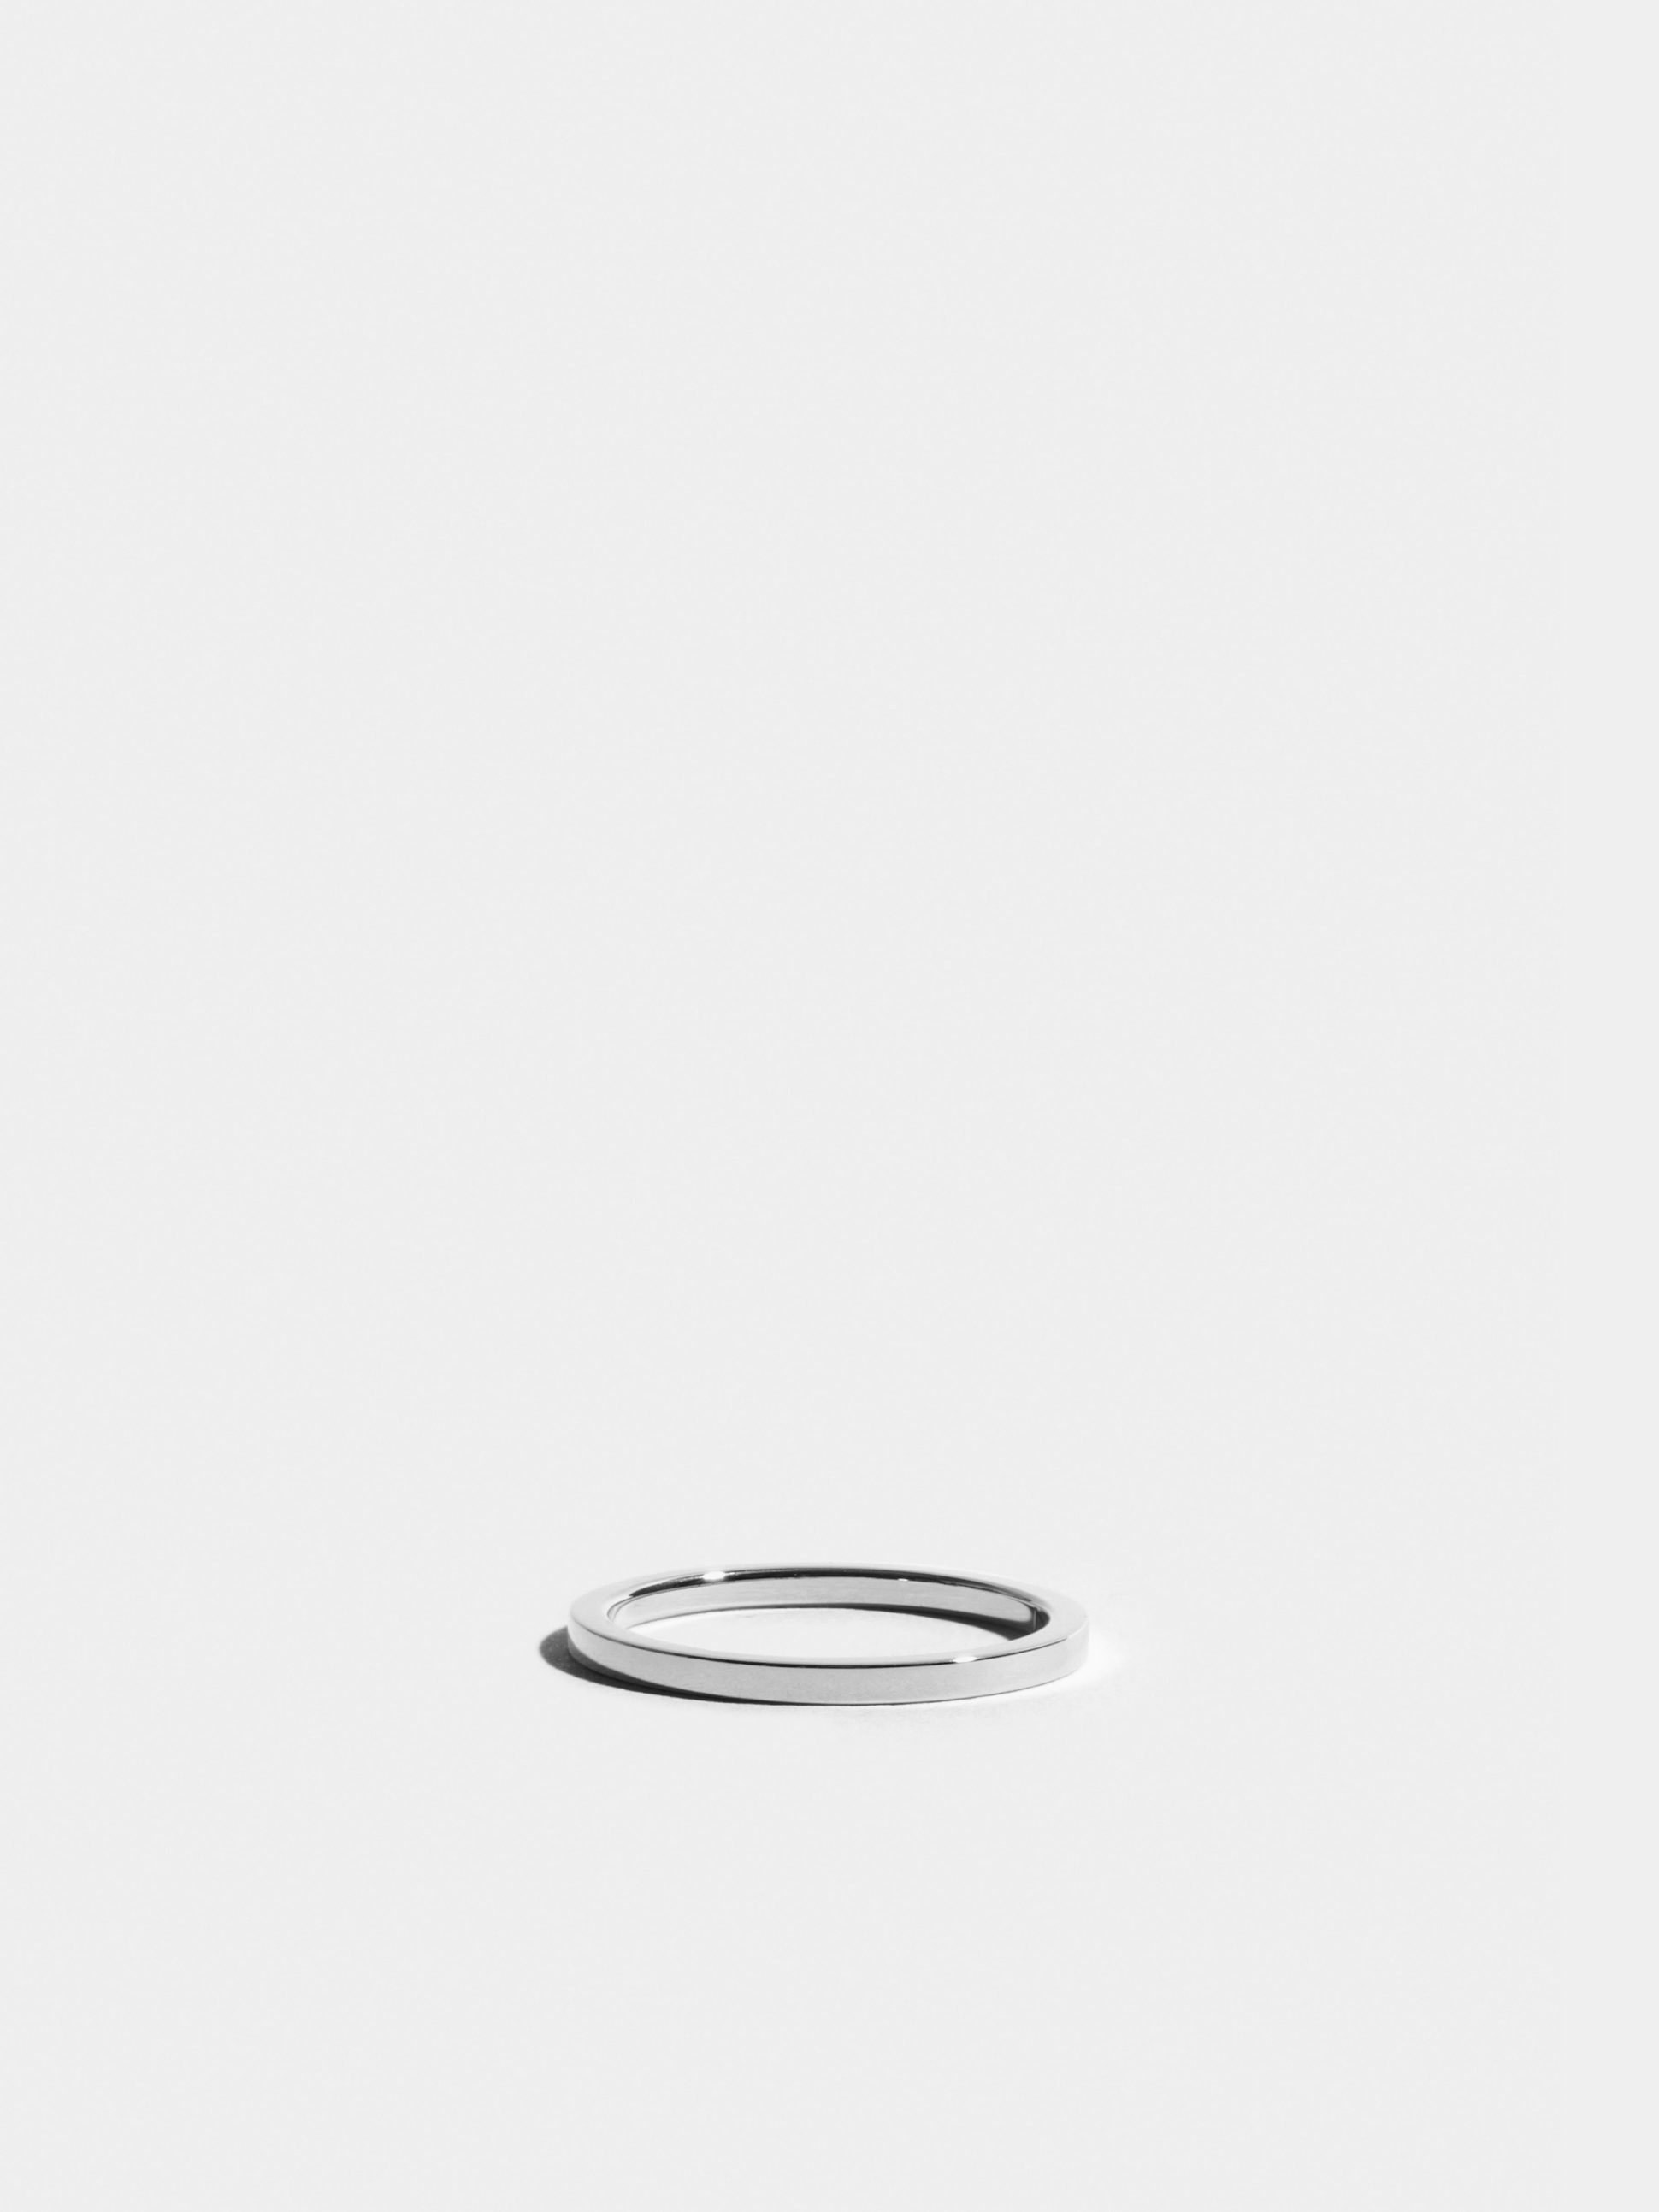 Anagramme "biseau" ring in 18k Fairmined ethical white gold